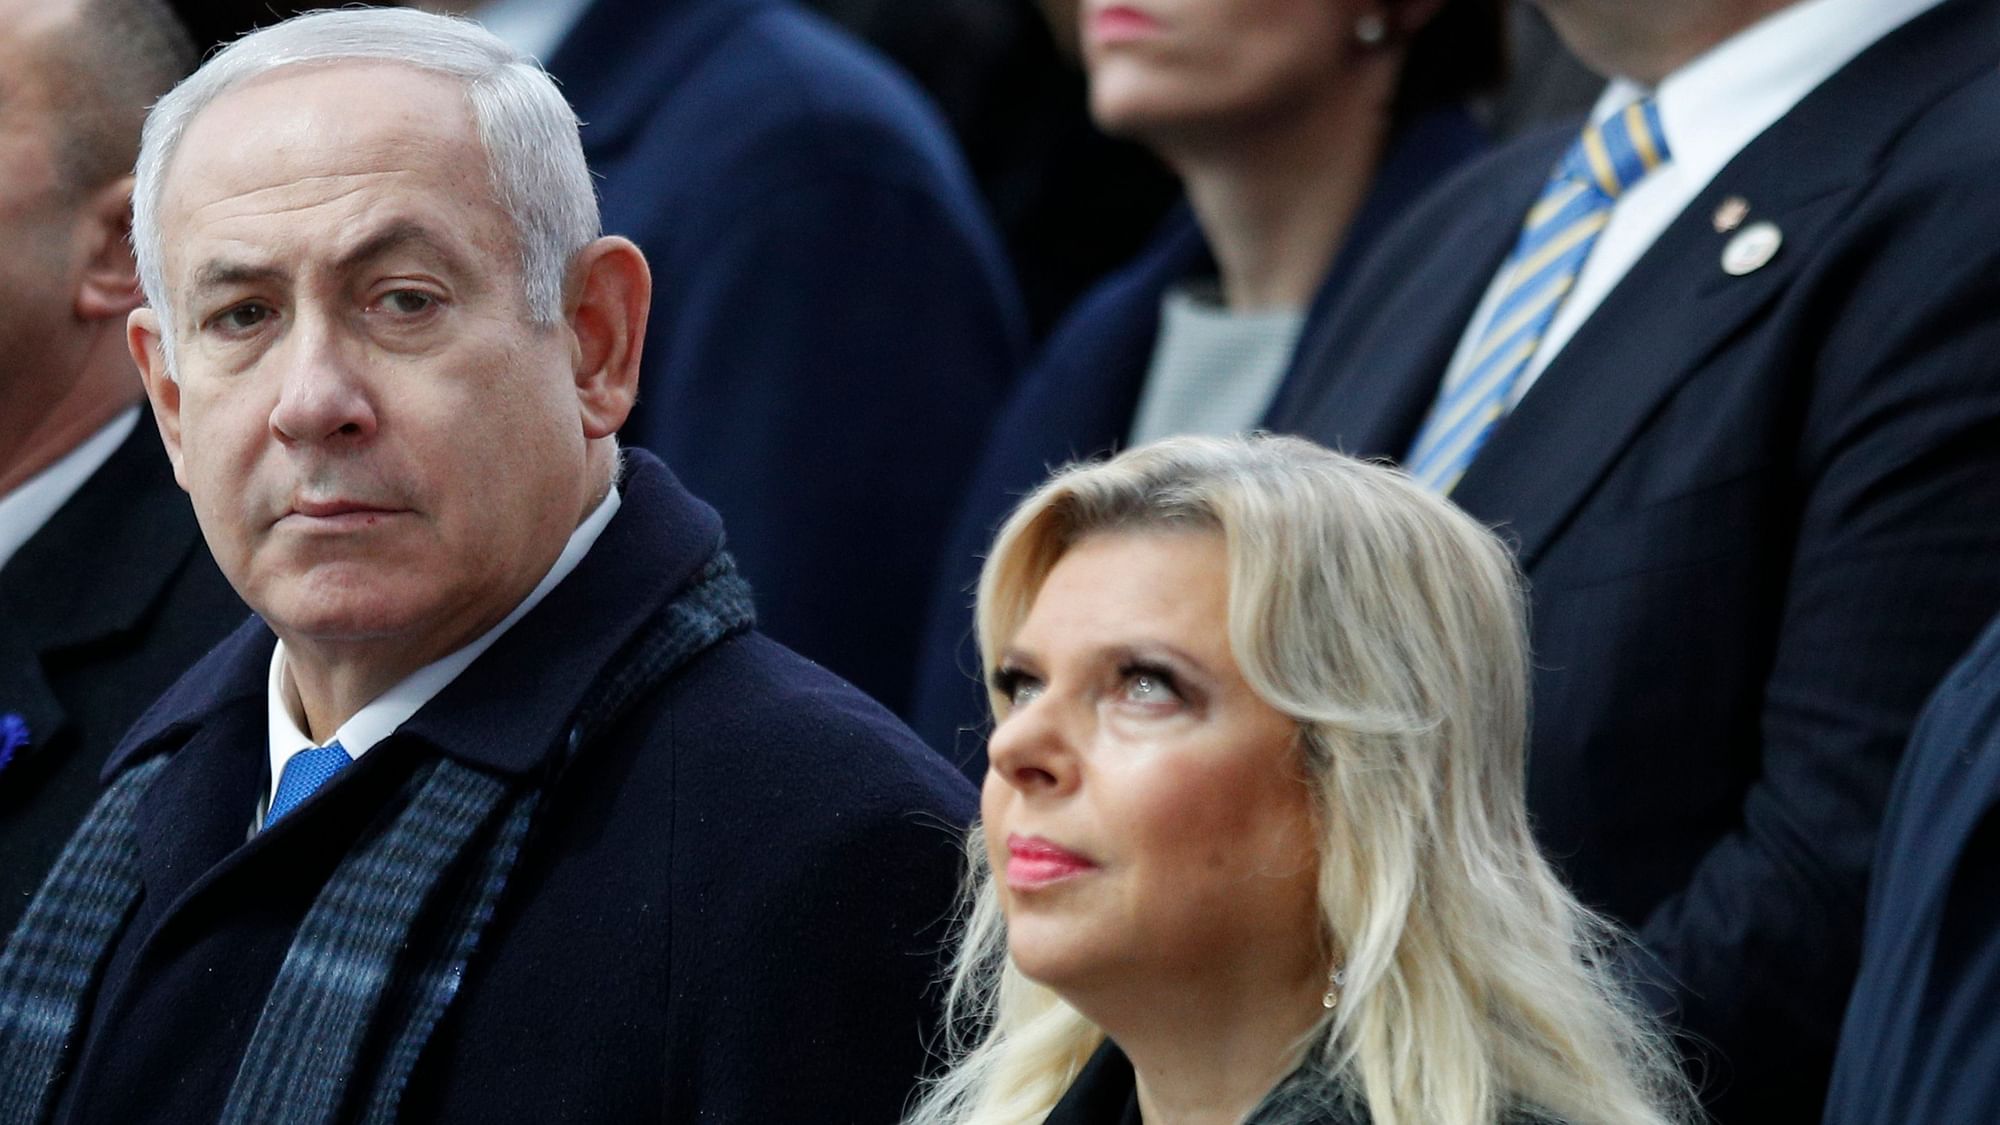 Israeli Prime Minister Benjamin Netanyahu and his wife Sara attend ceremonies at the Arc de Triomphe in Paris in this file photo.